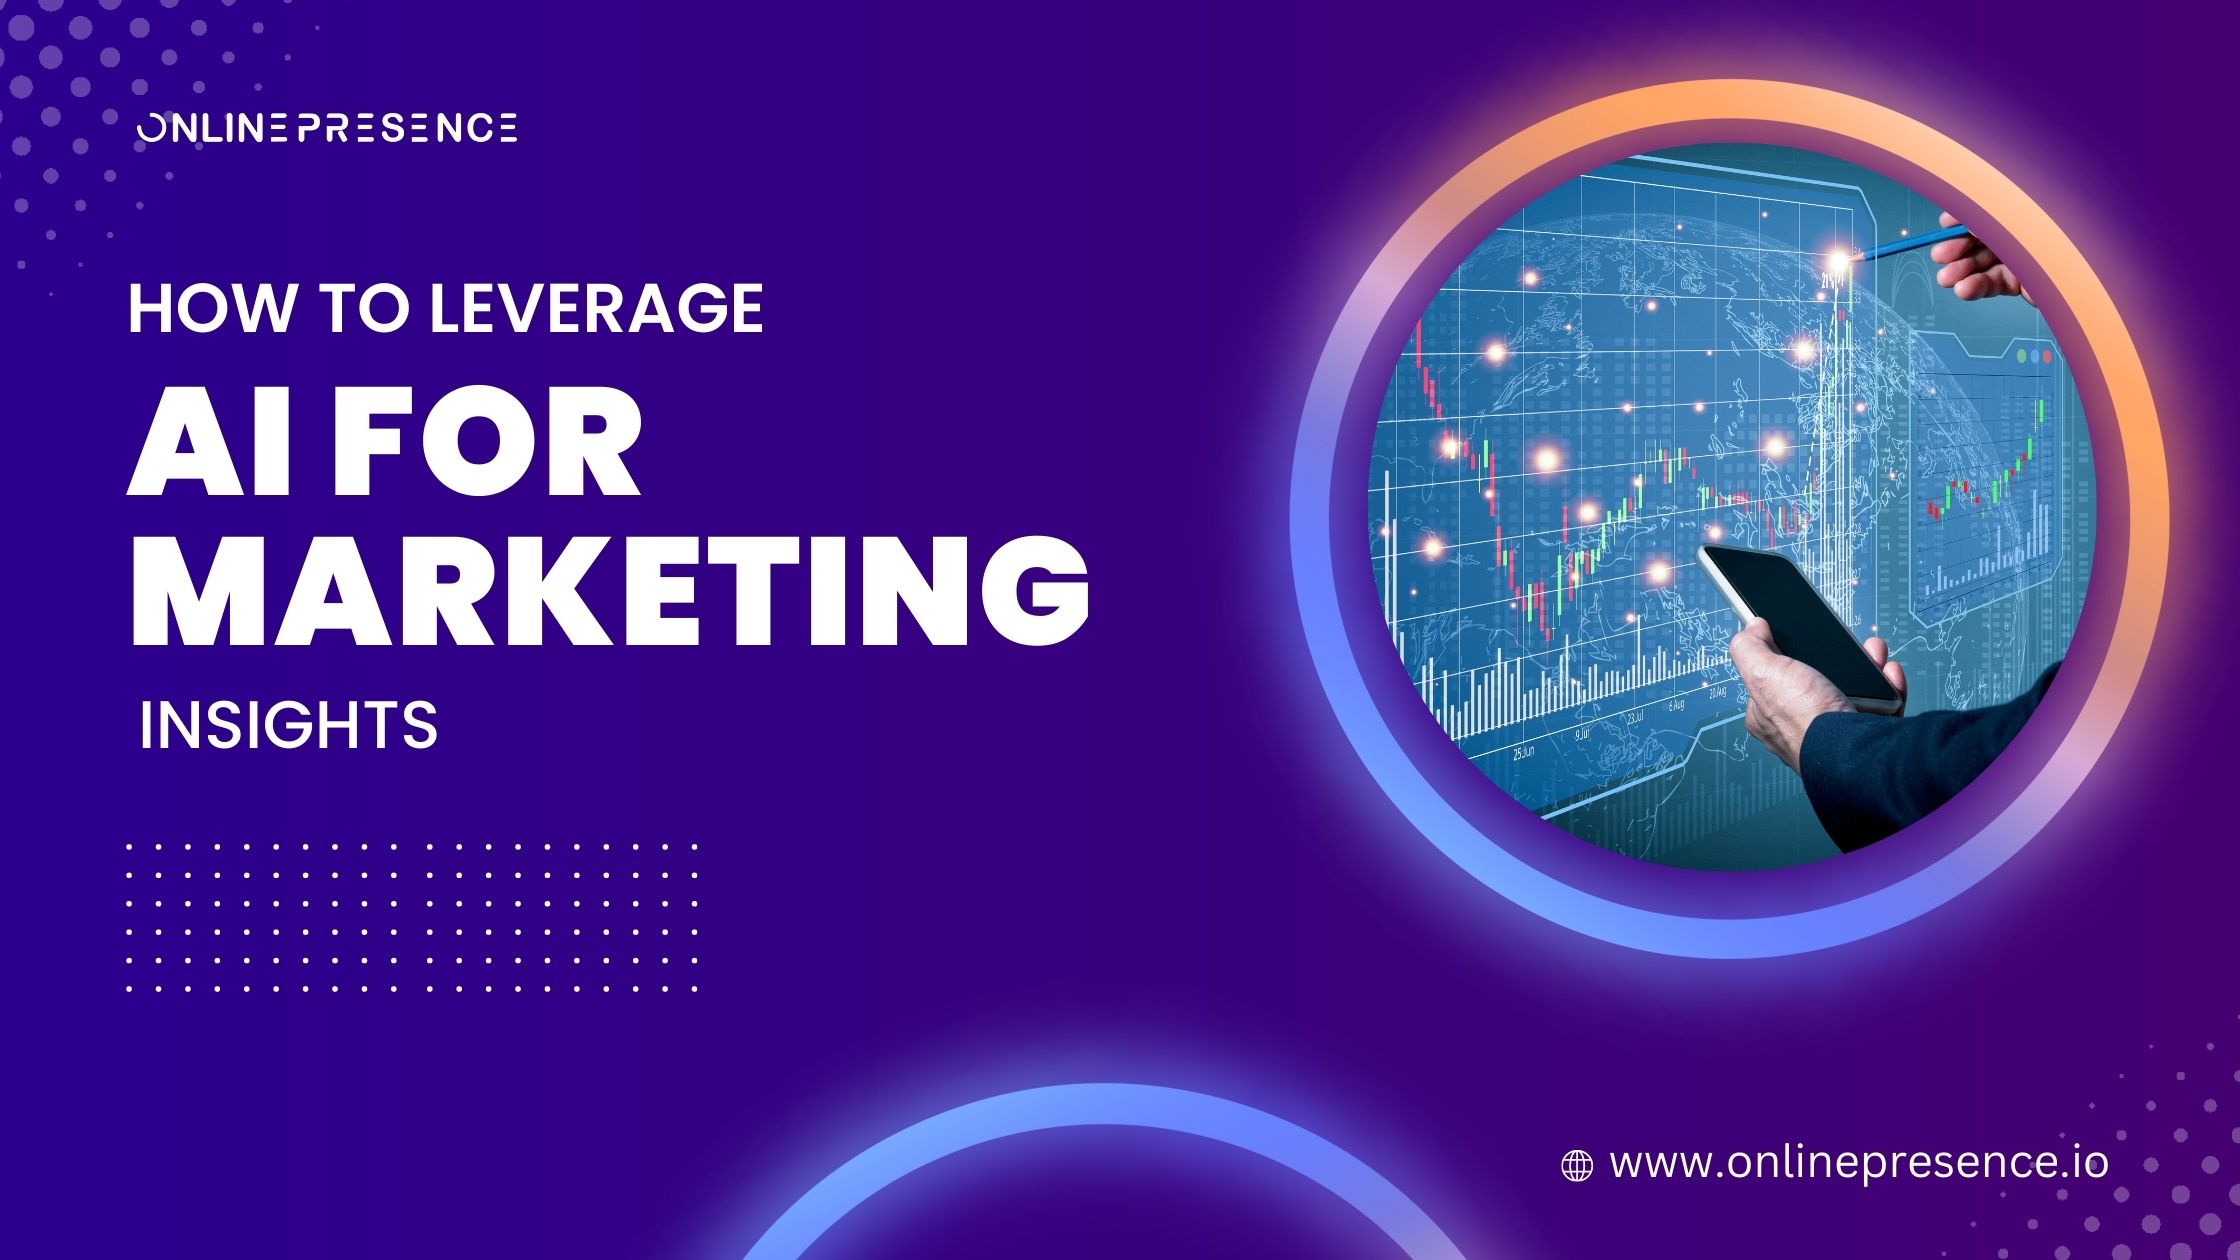 How to leverage AI for marketing